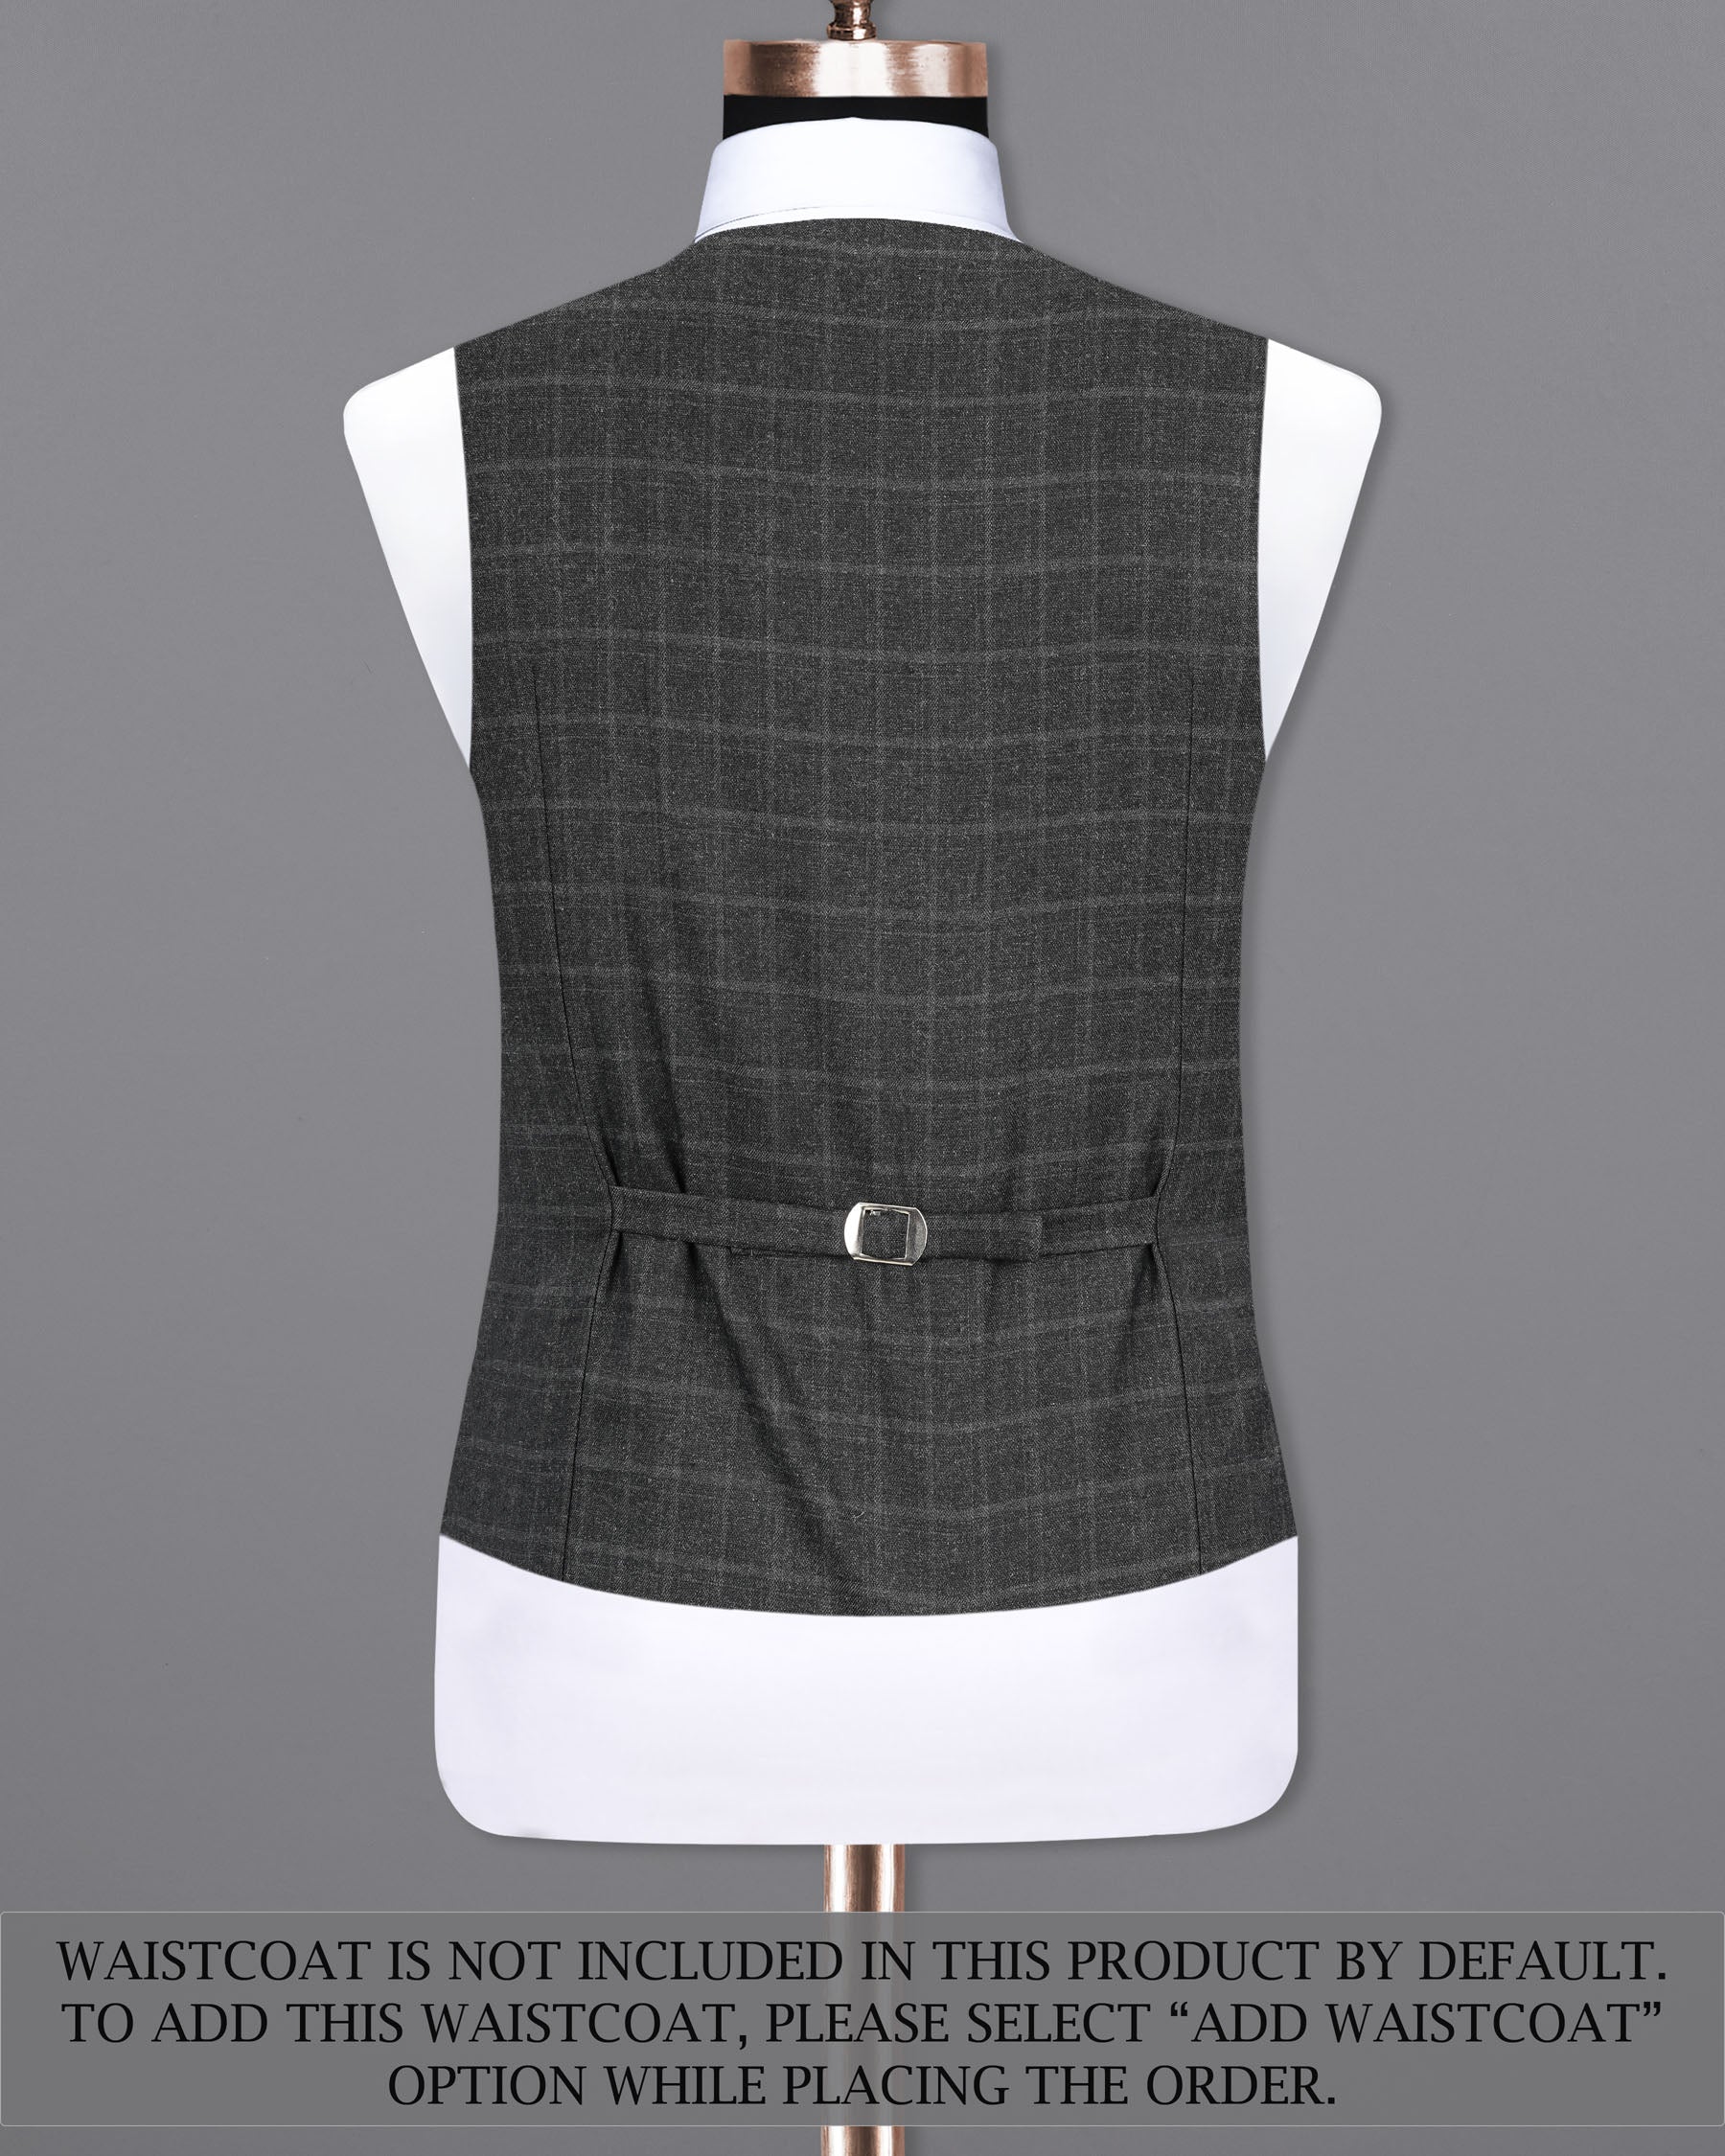 Dune Gray windowpane Double Breasted Suit